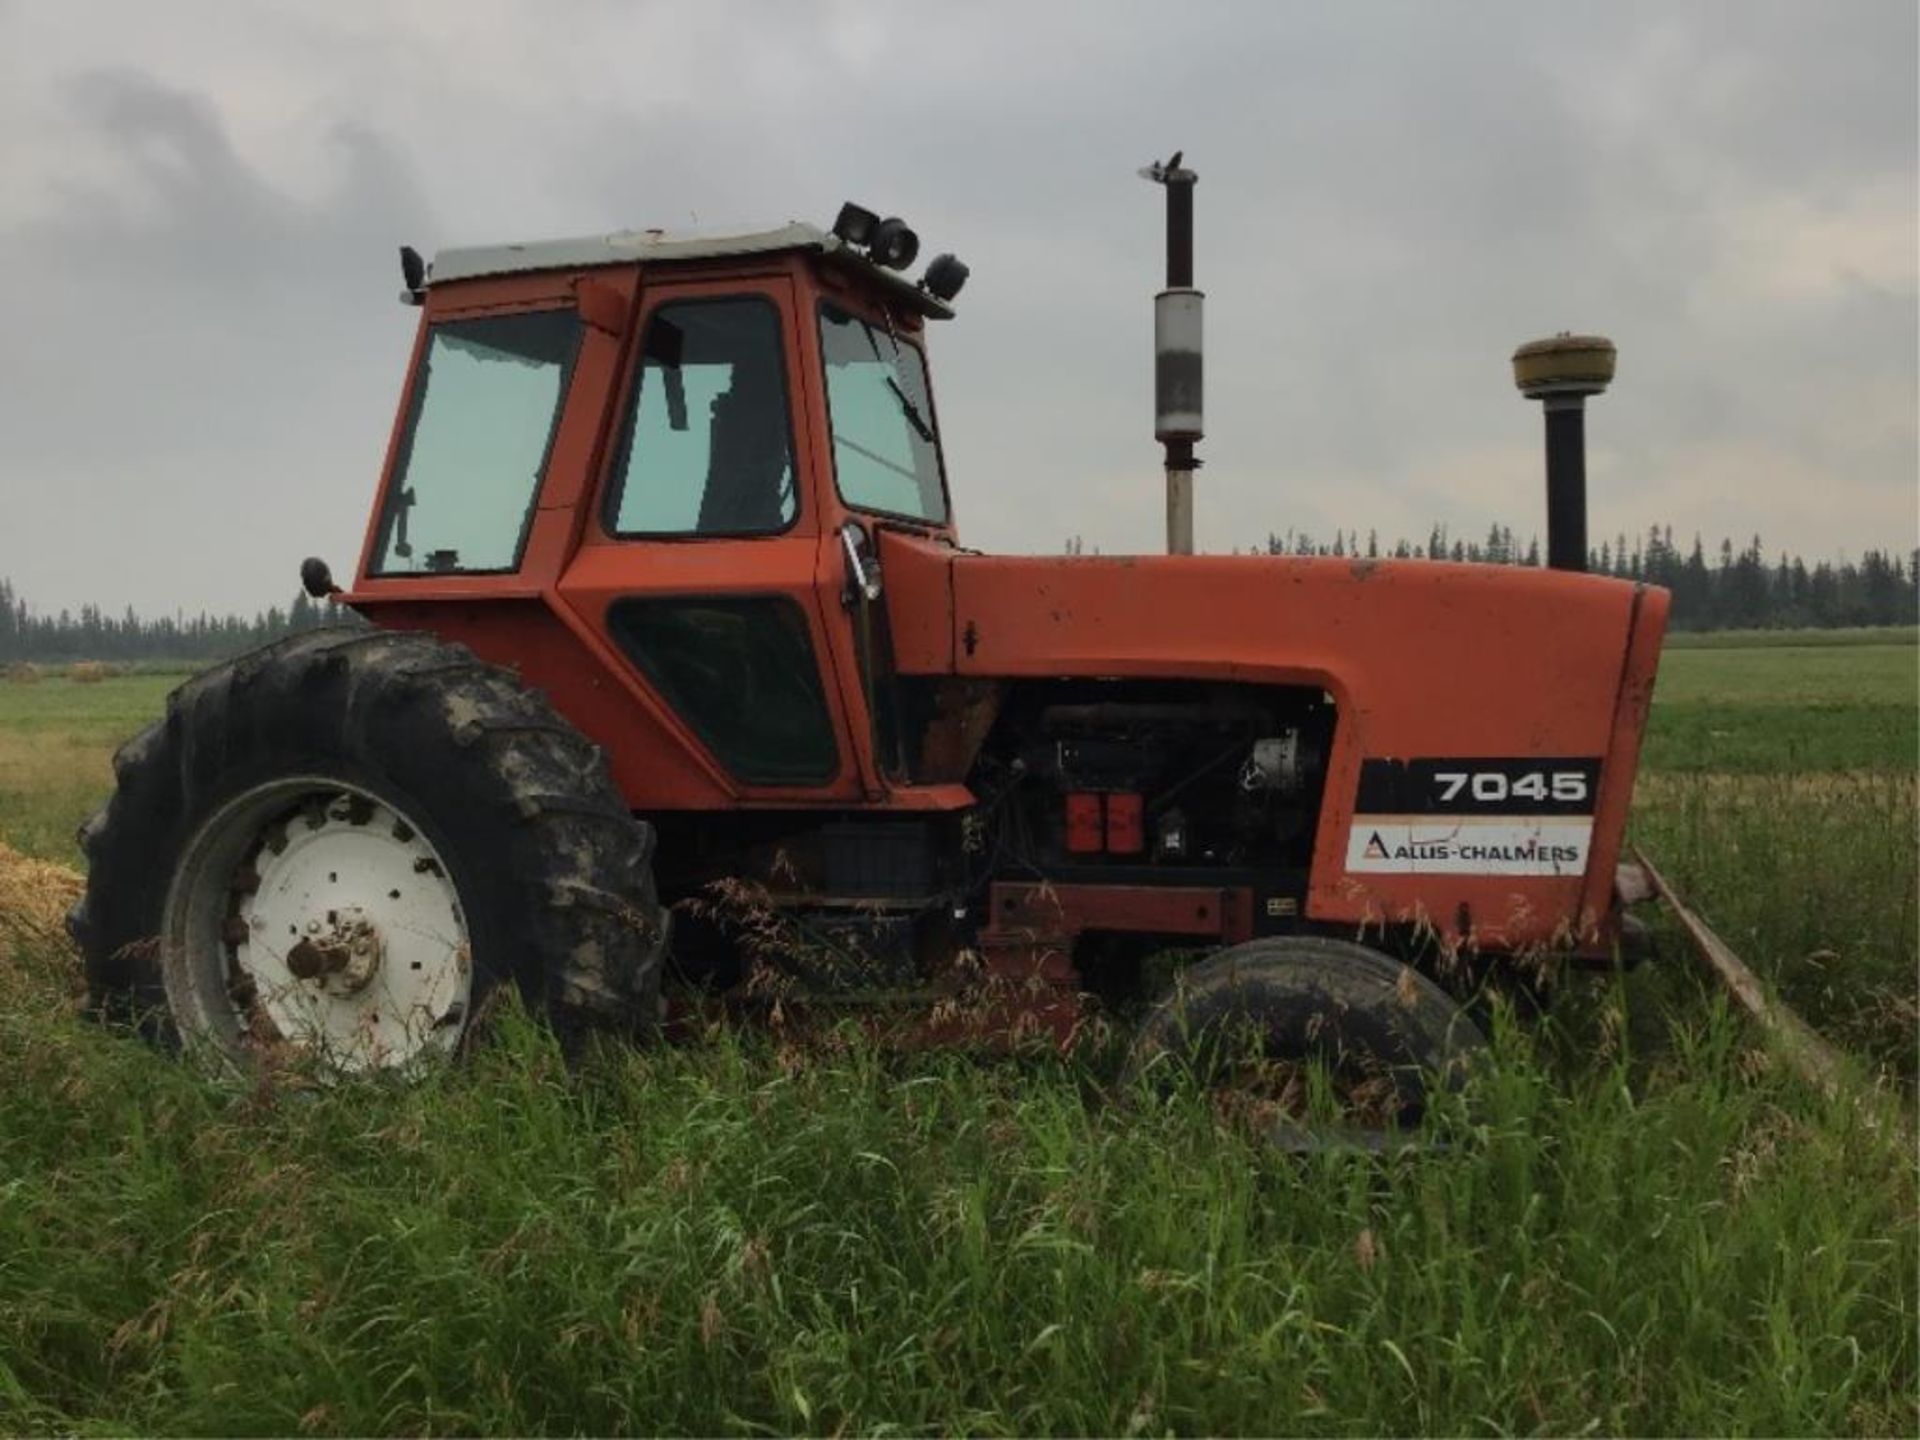 Allis Chalmers 7045 2wd Tractor 173hp 6cyl Eng, 20.8-38rr, 3 rear hyd, 3472hrs. (Not a running Tract